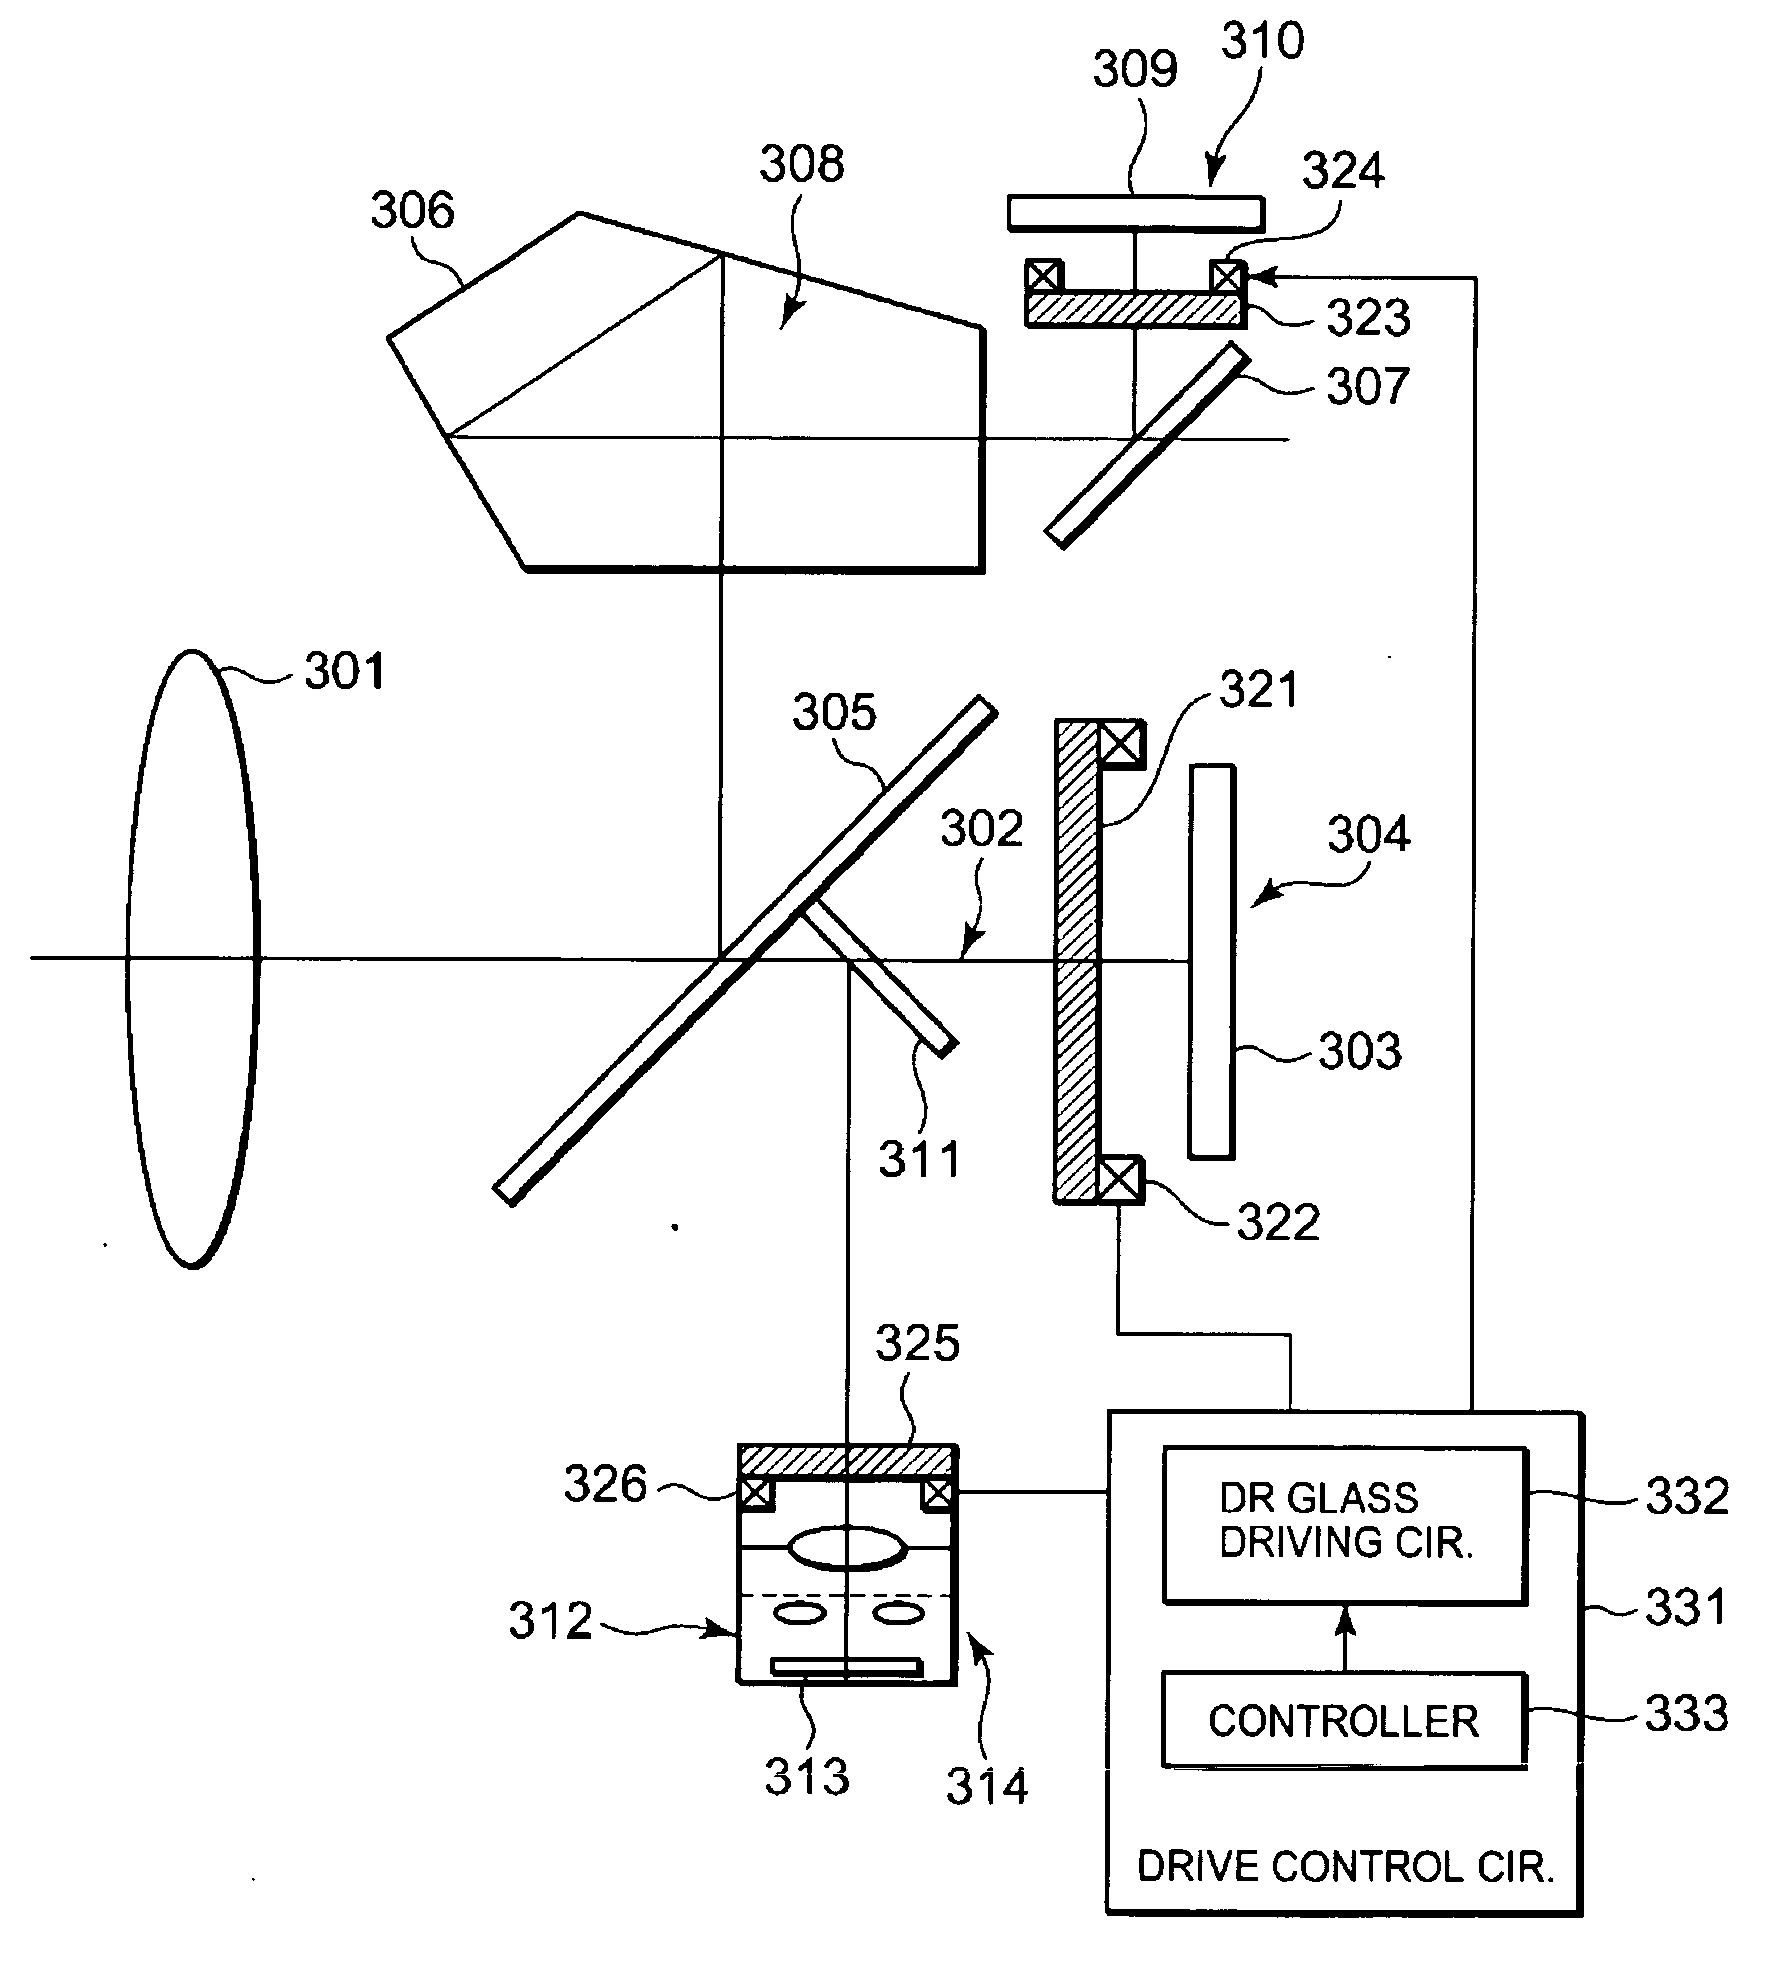 Optical apparatus with dust reduction capability